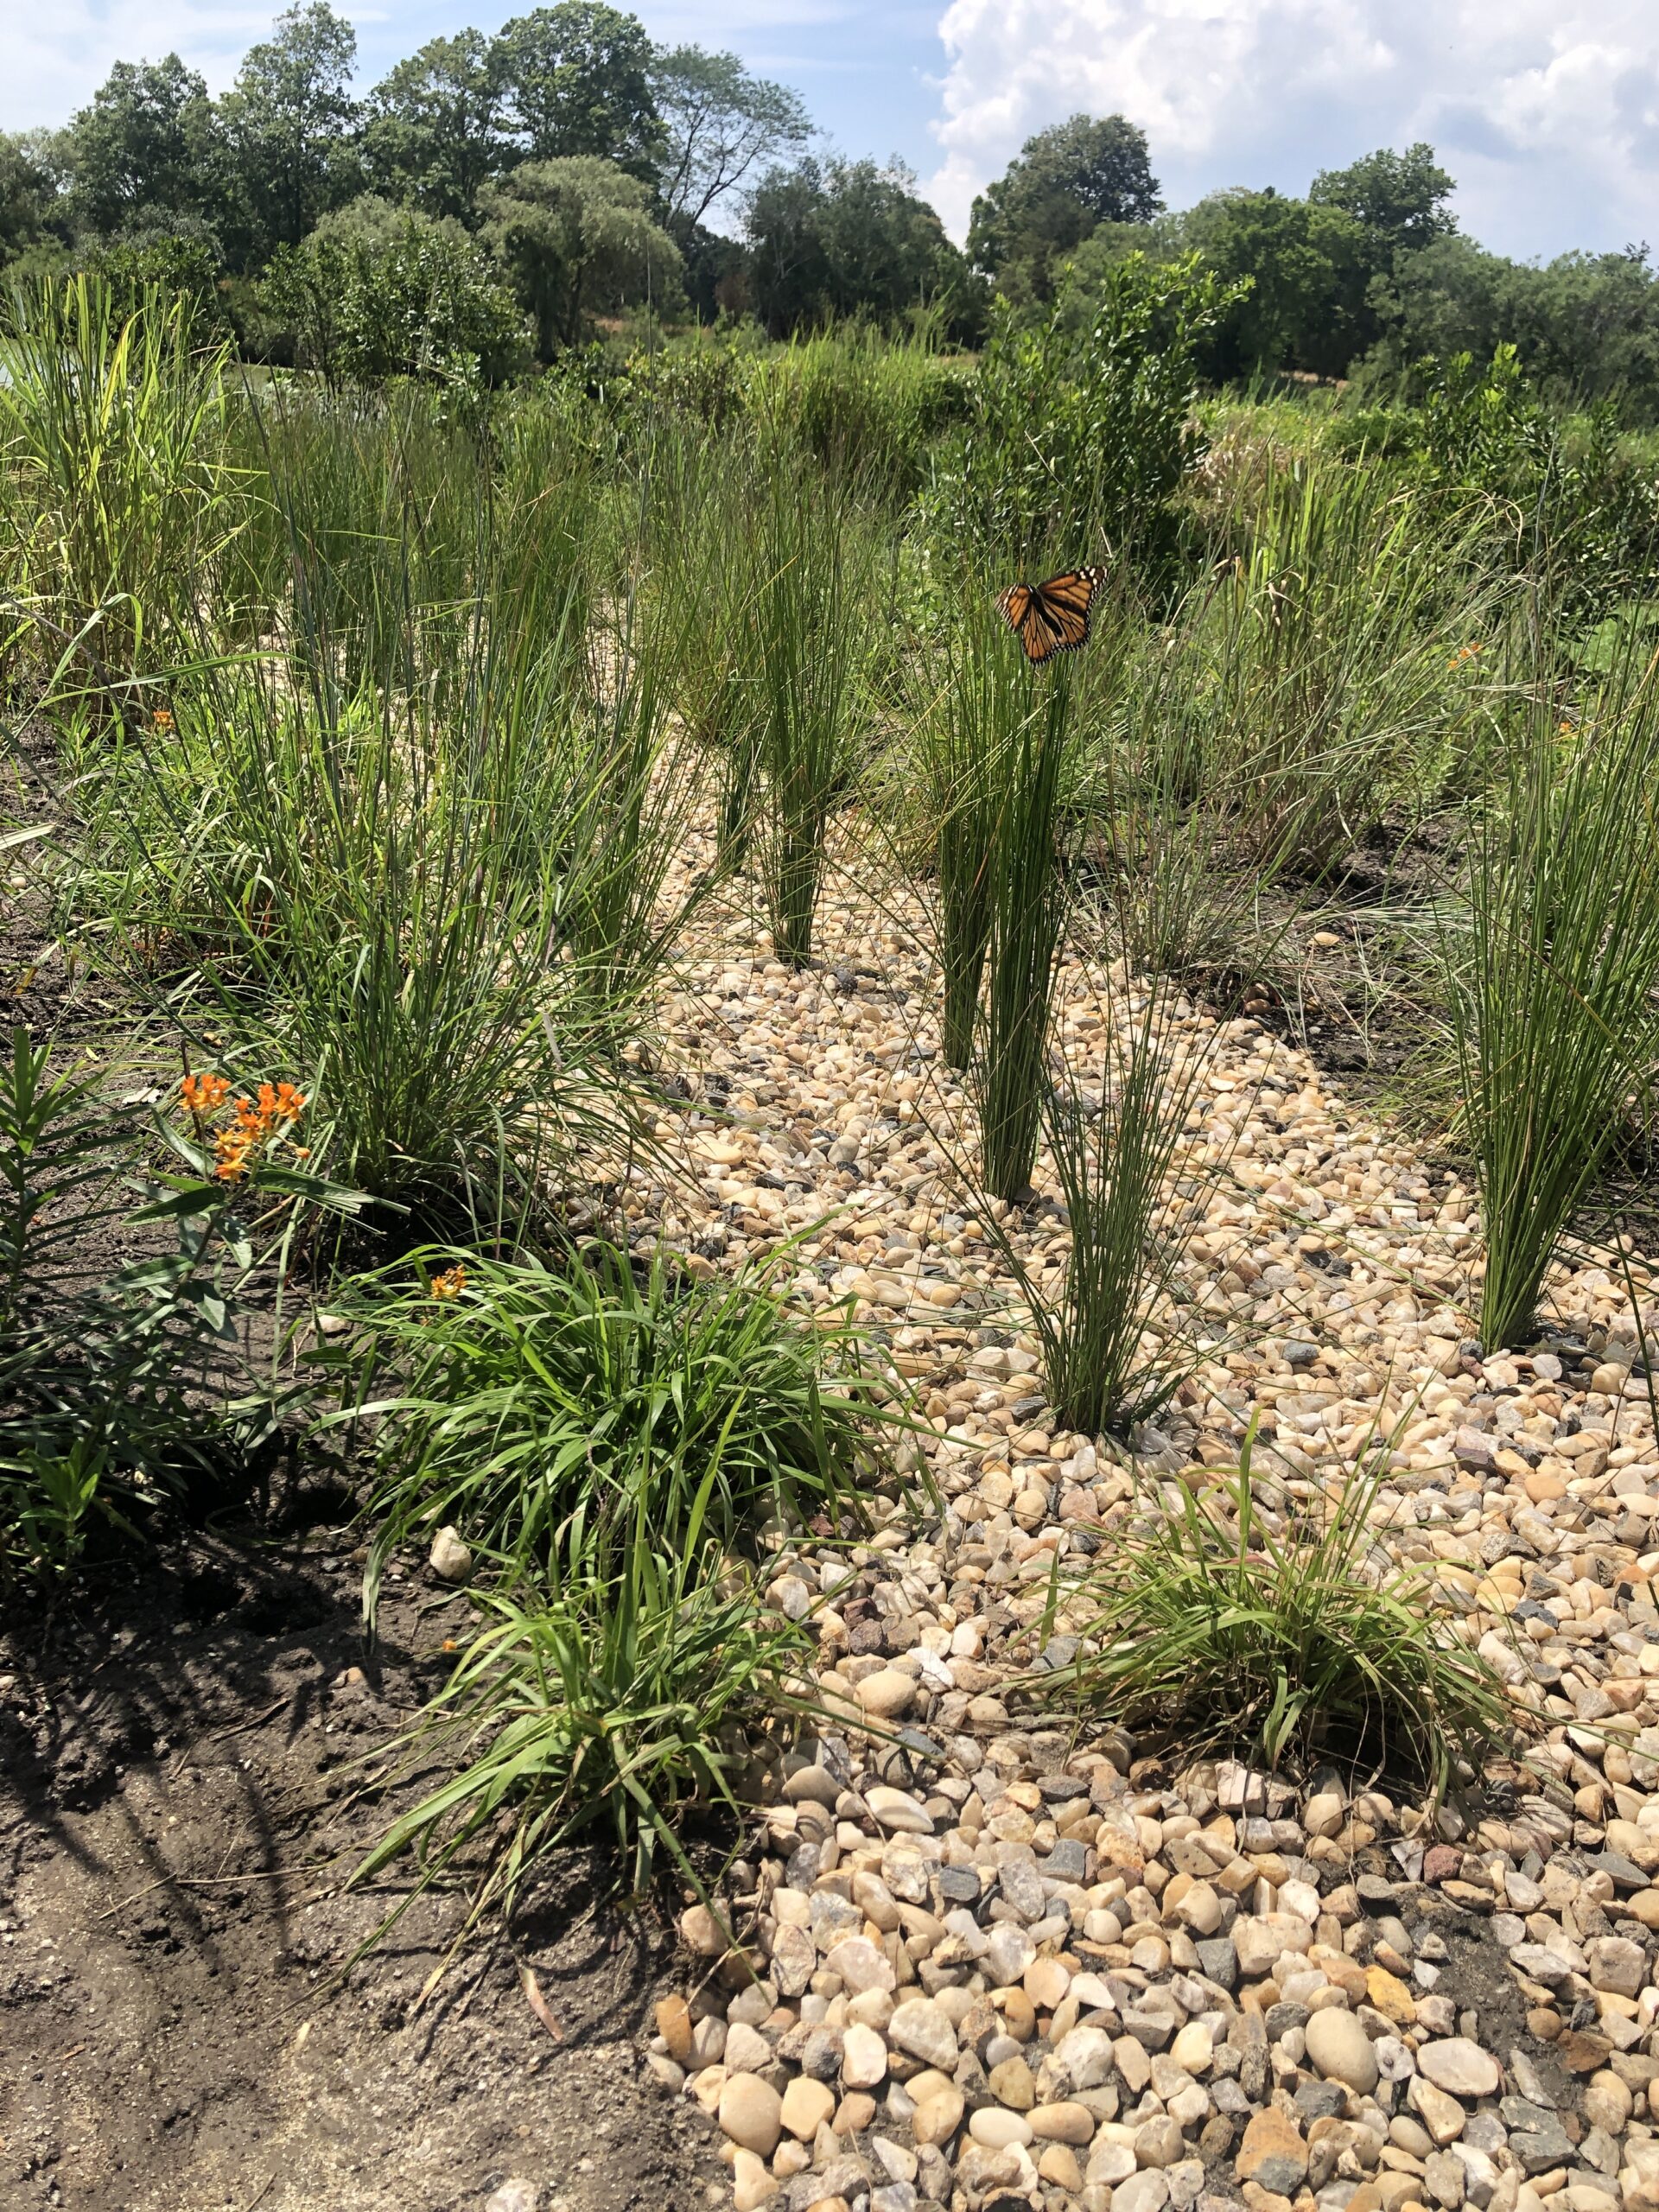 The new bioswale installed at the end of Linden Lane by Piazza Horticultural will not only improve water quality in Lake Agawam but will also be a habitat for native species, like this now endangered Monarch butterfly that was flitting among the garden earlier this week. CAILIN RILEY